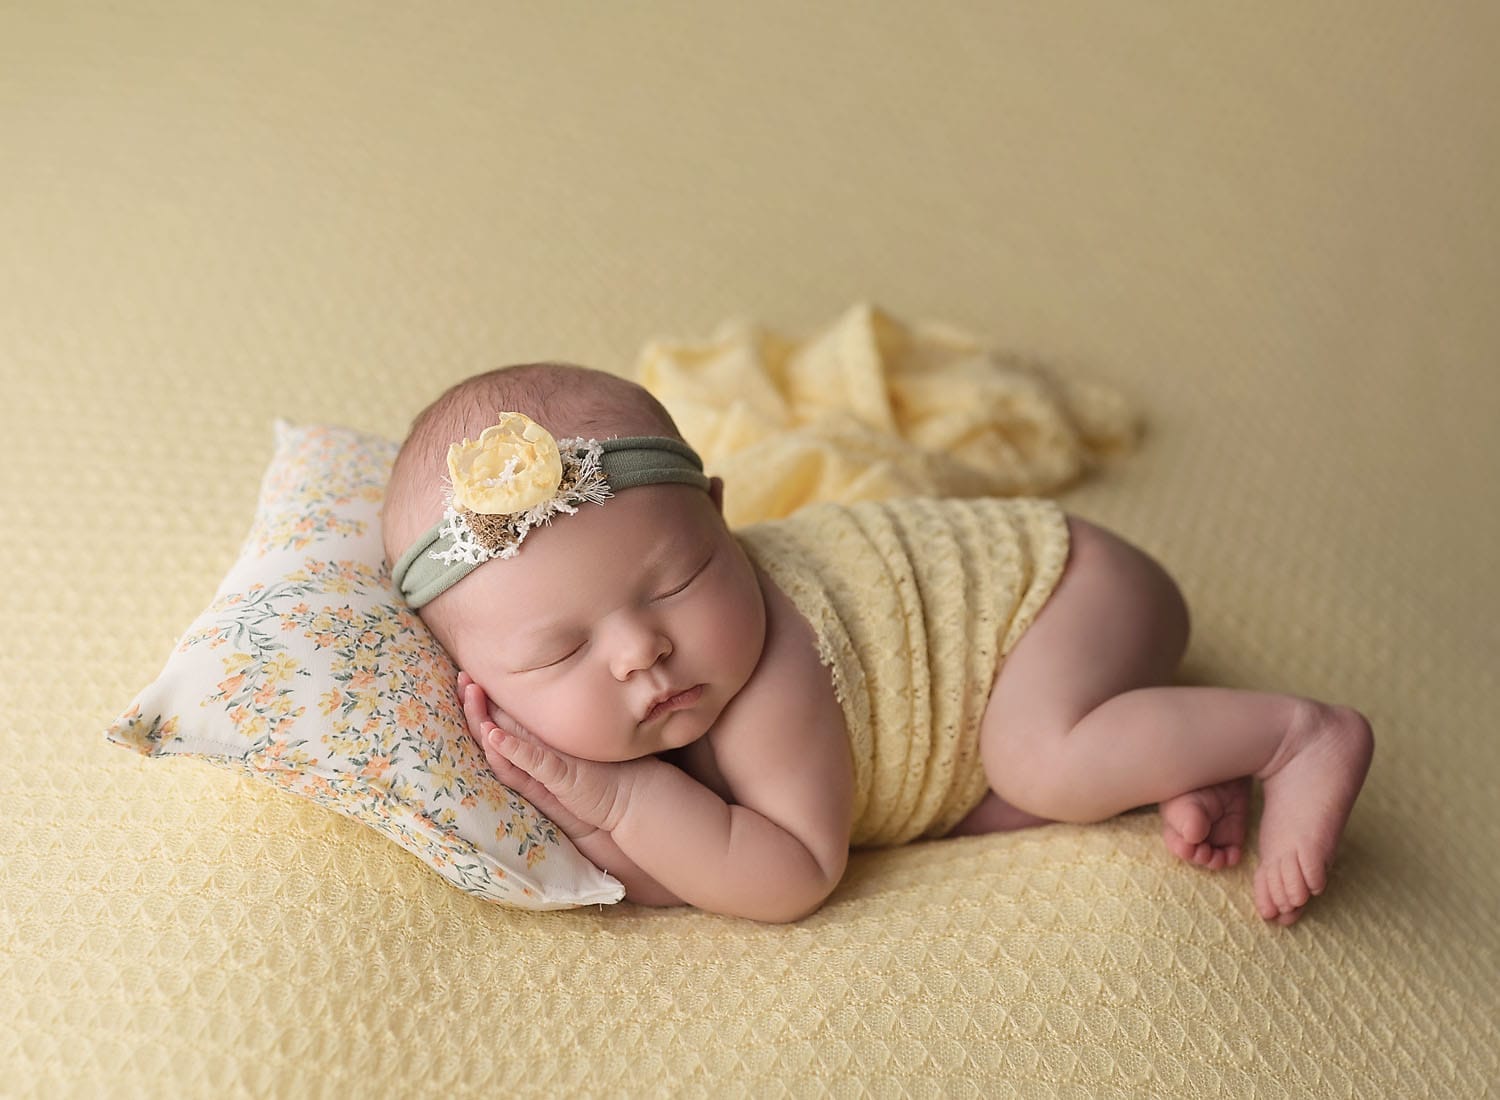 A newborn baby girl in the studio is lying on a yellow backdrop with her head on a floral pillow, wearing a floral headband.